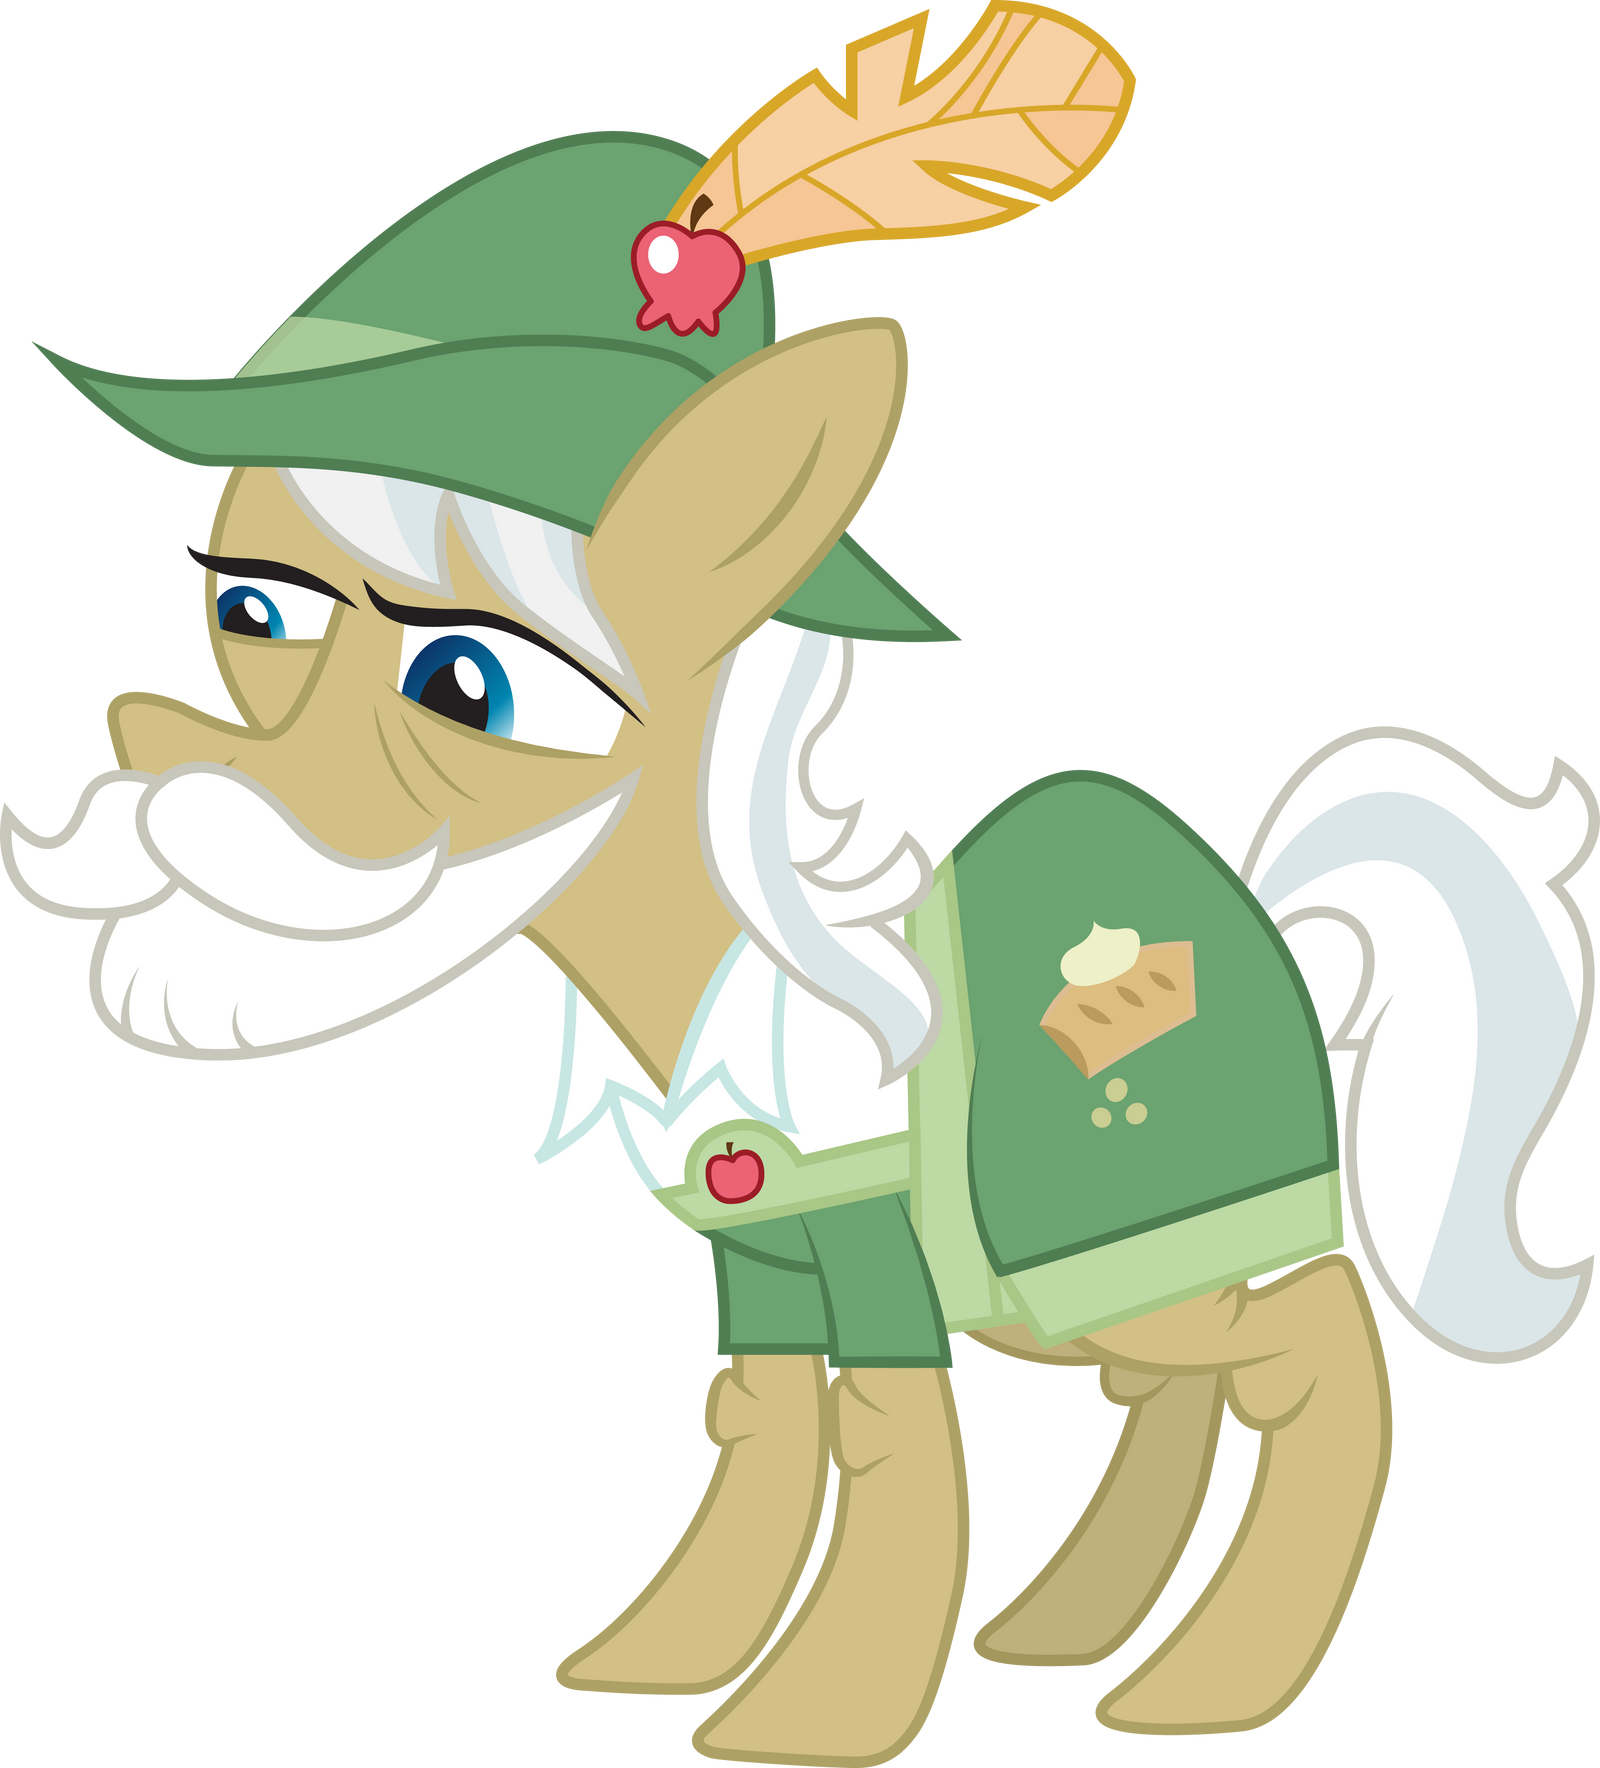 uncle_apple_strudel_by_sircxyrtyx-d4lwxth.png